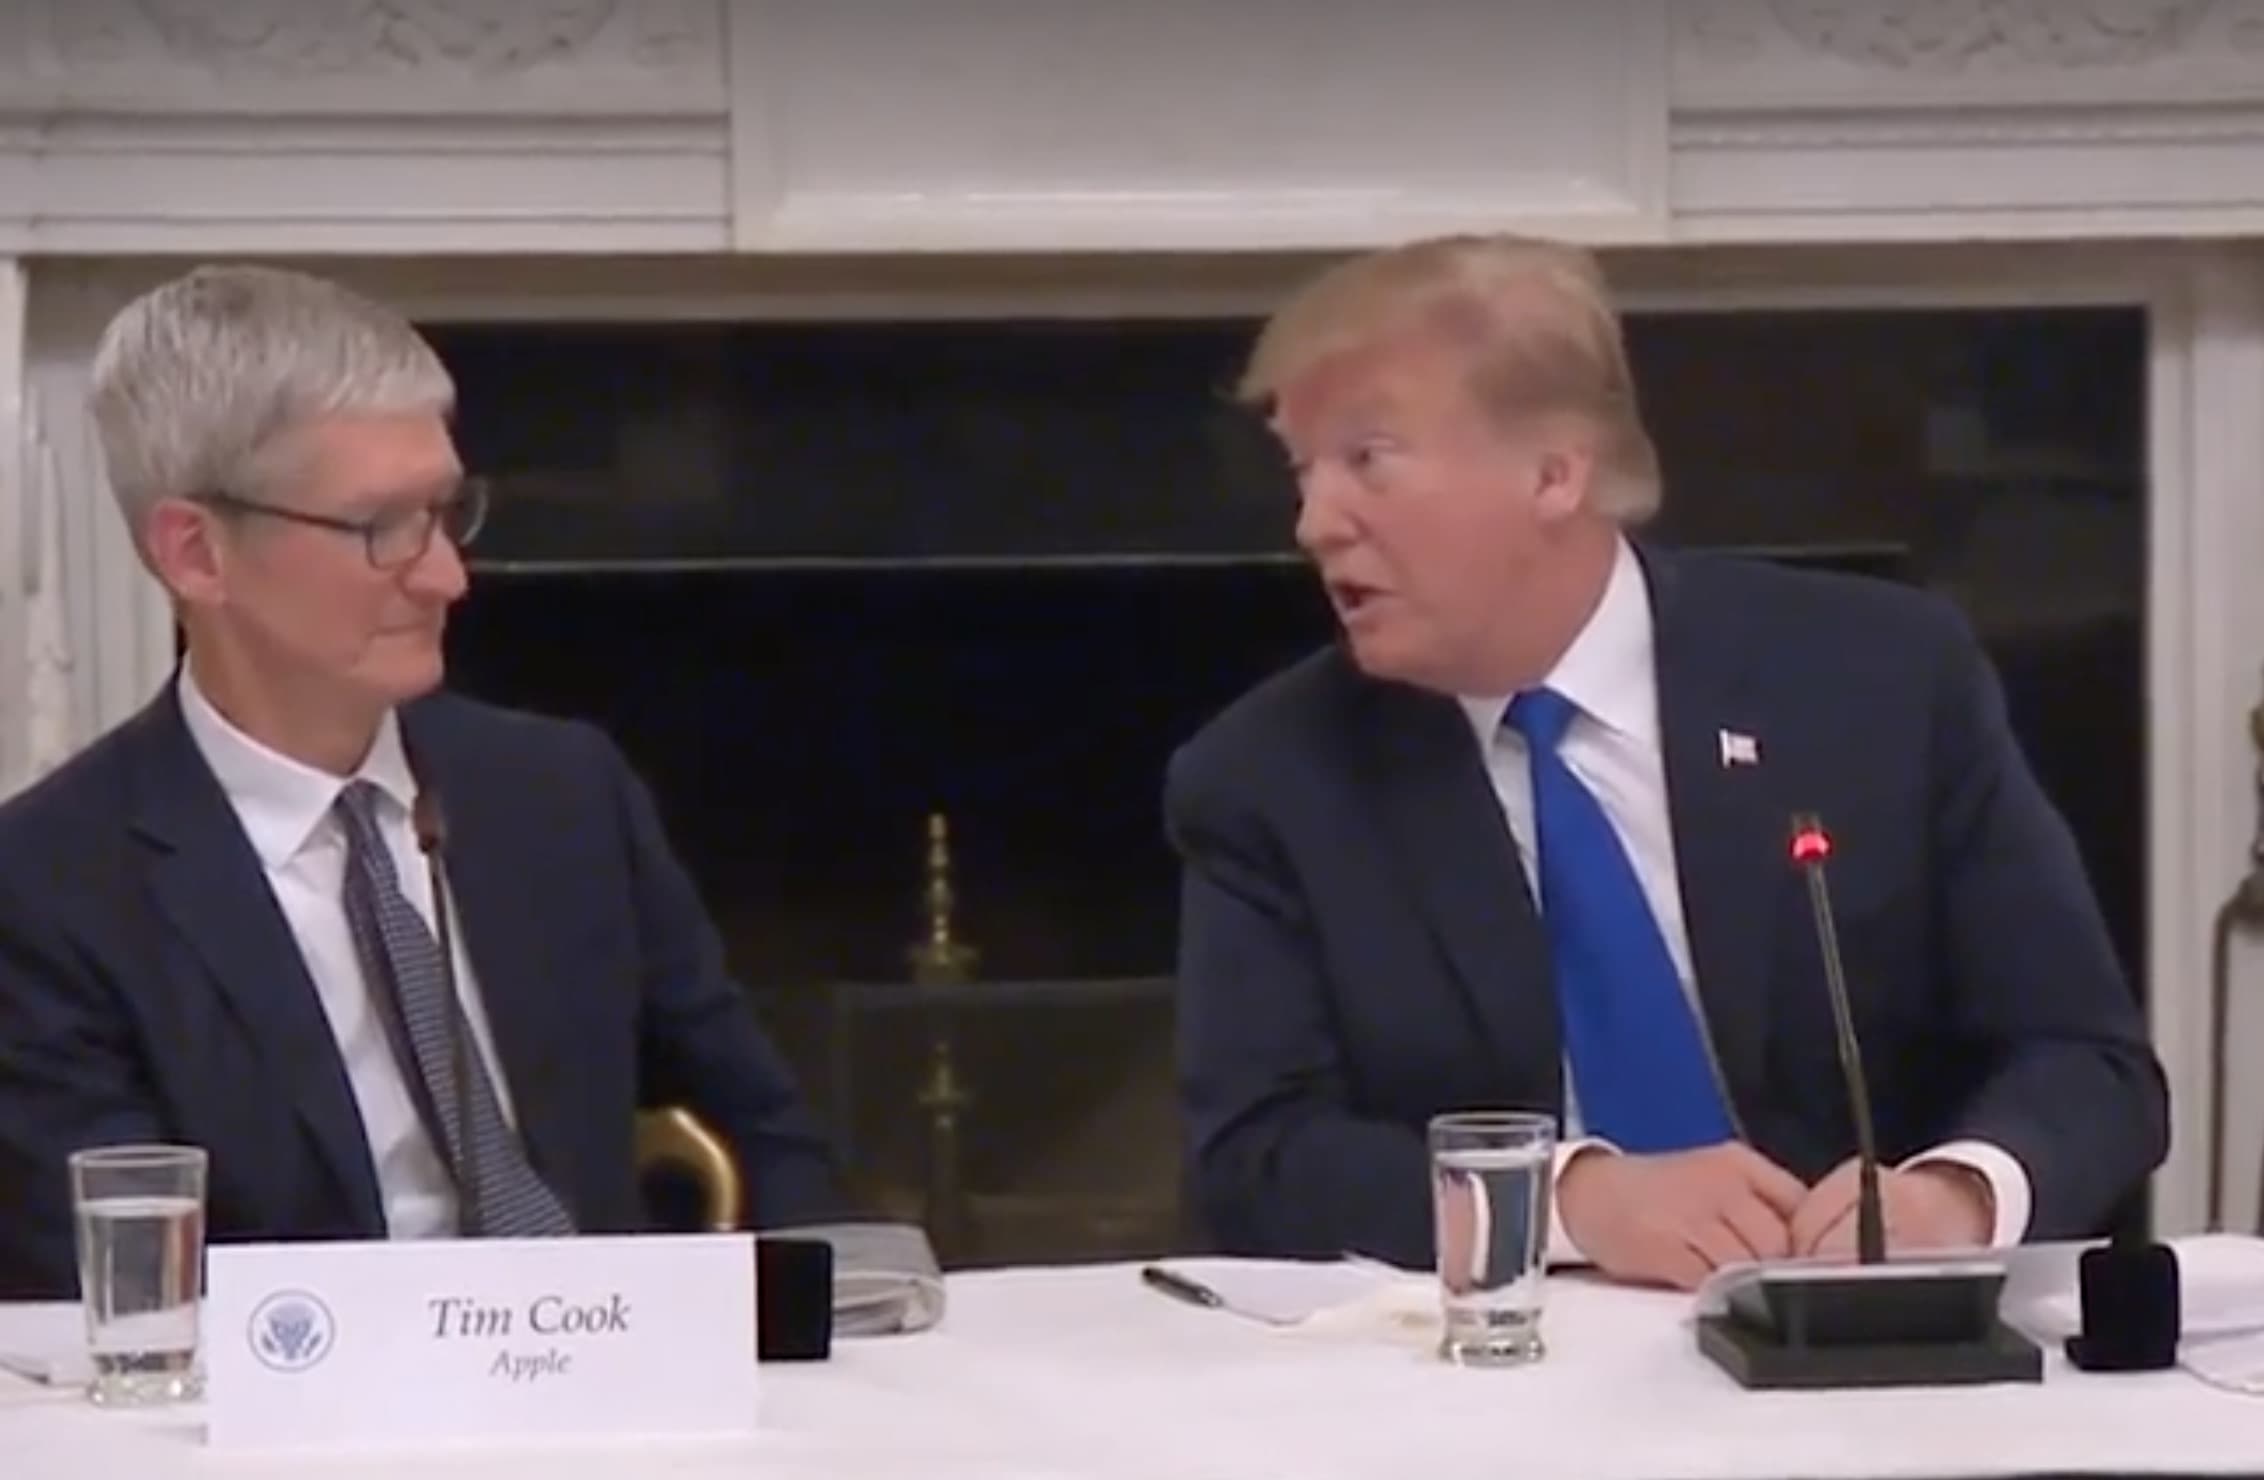 Apple CEO Tim Cook and President Donald Trump in a White House meeting earlier this year